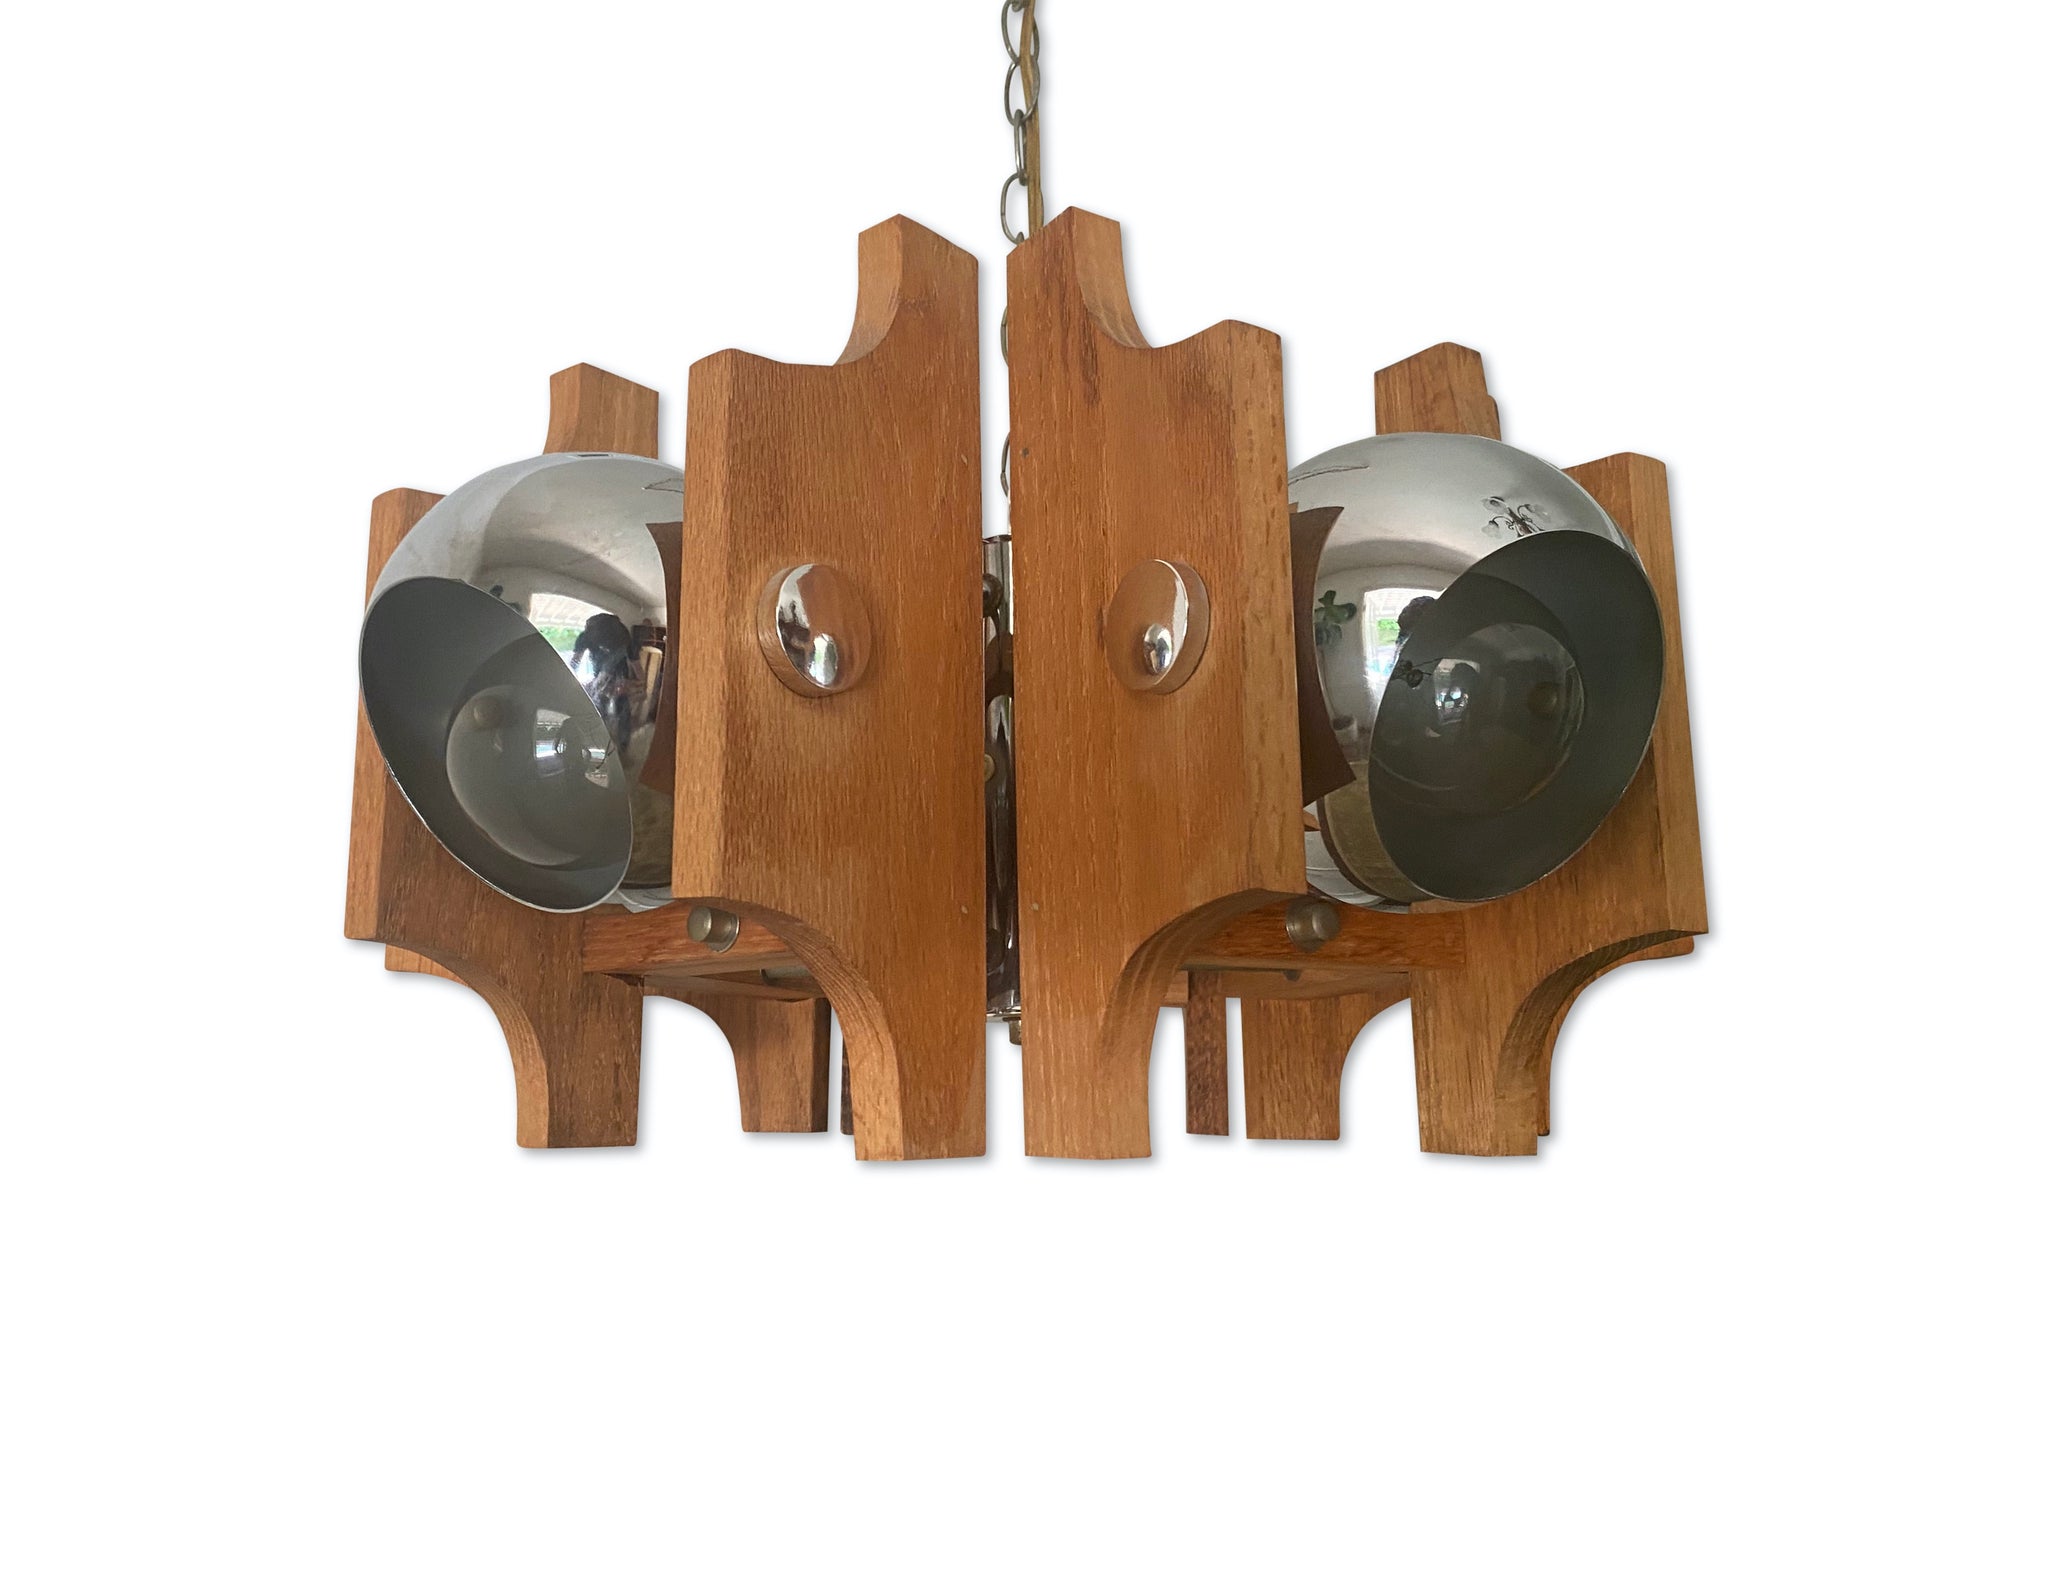 VINTAGE 1970S WOOOD AND CHROME ATOMIC CHANDELIER HANGING PENDANT CEILING LIGHT